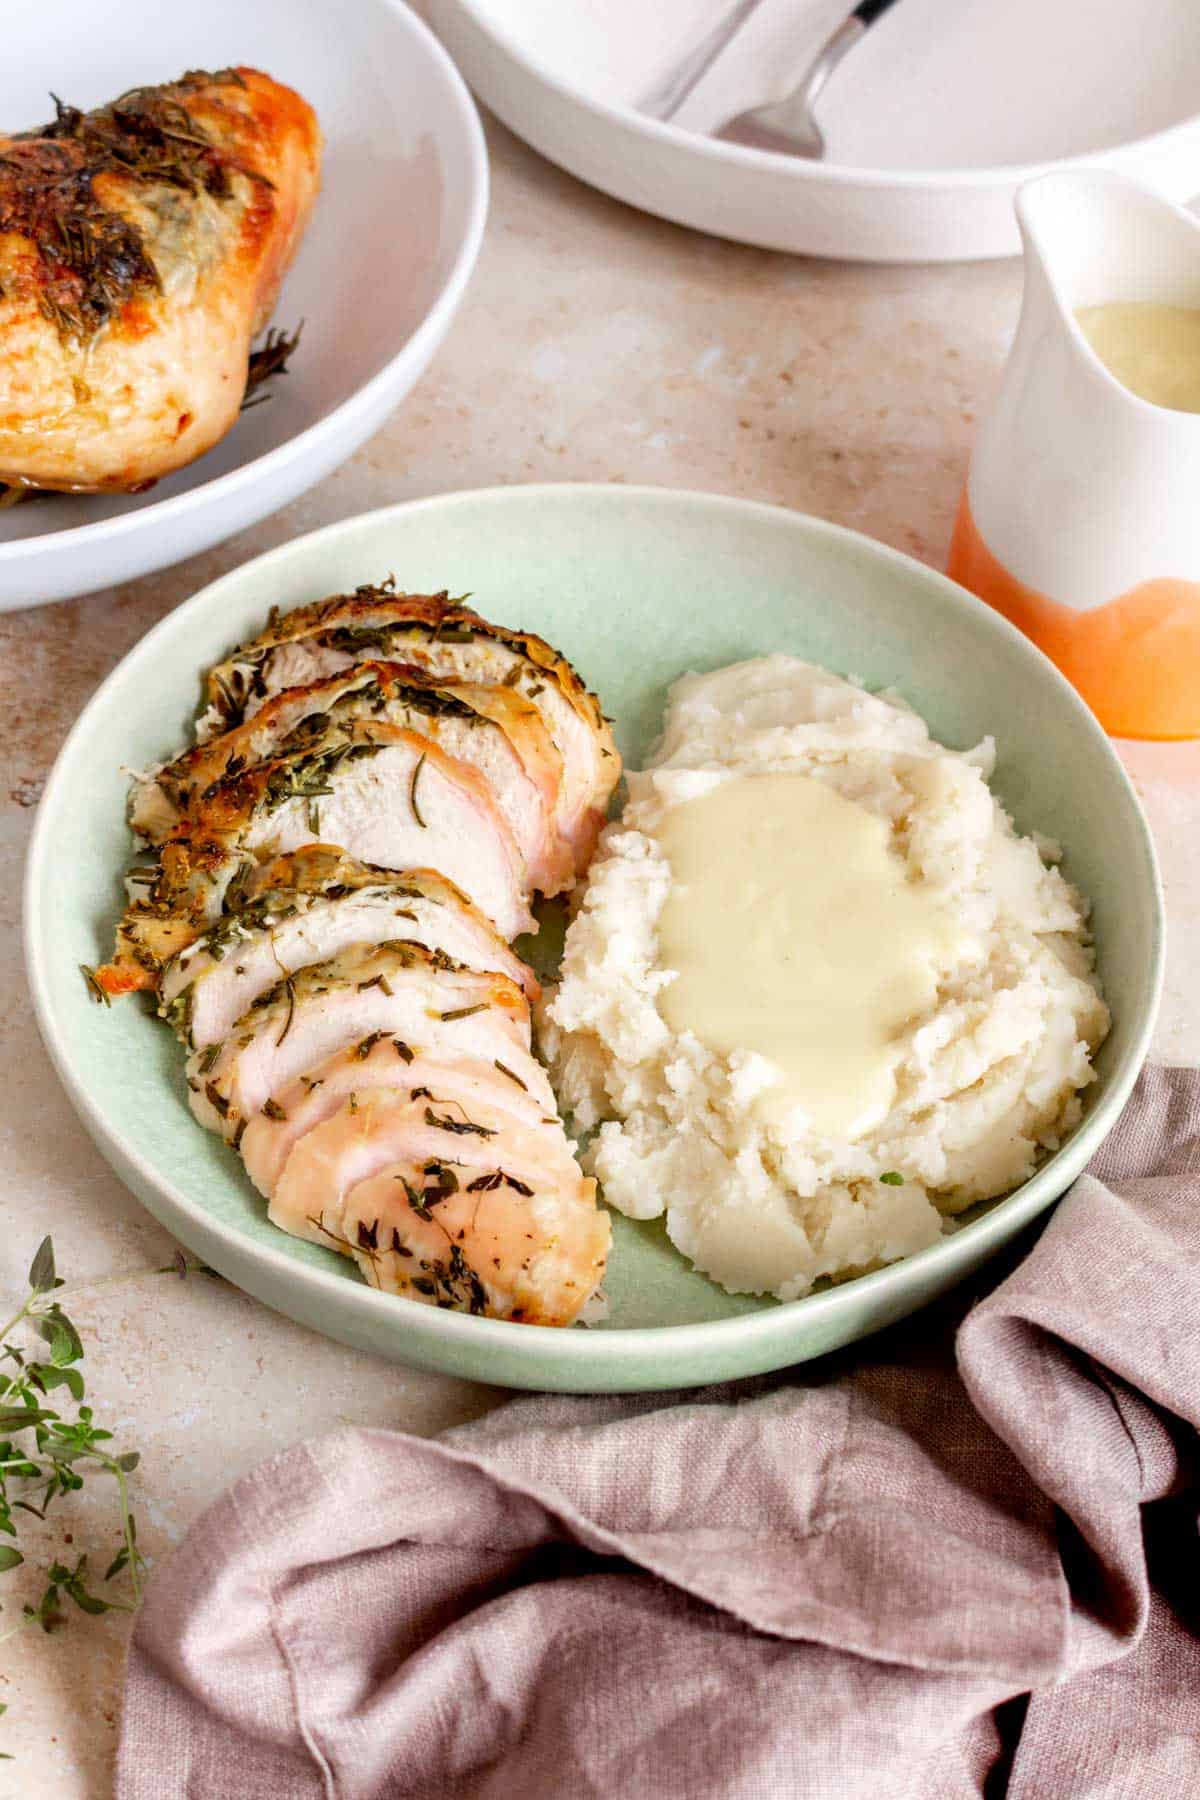 A plate with a serving of dutch oven turkey breast and mashed potatoes topped with gravy.